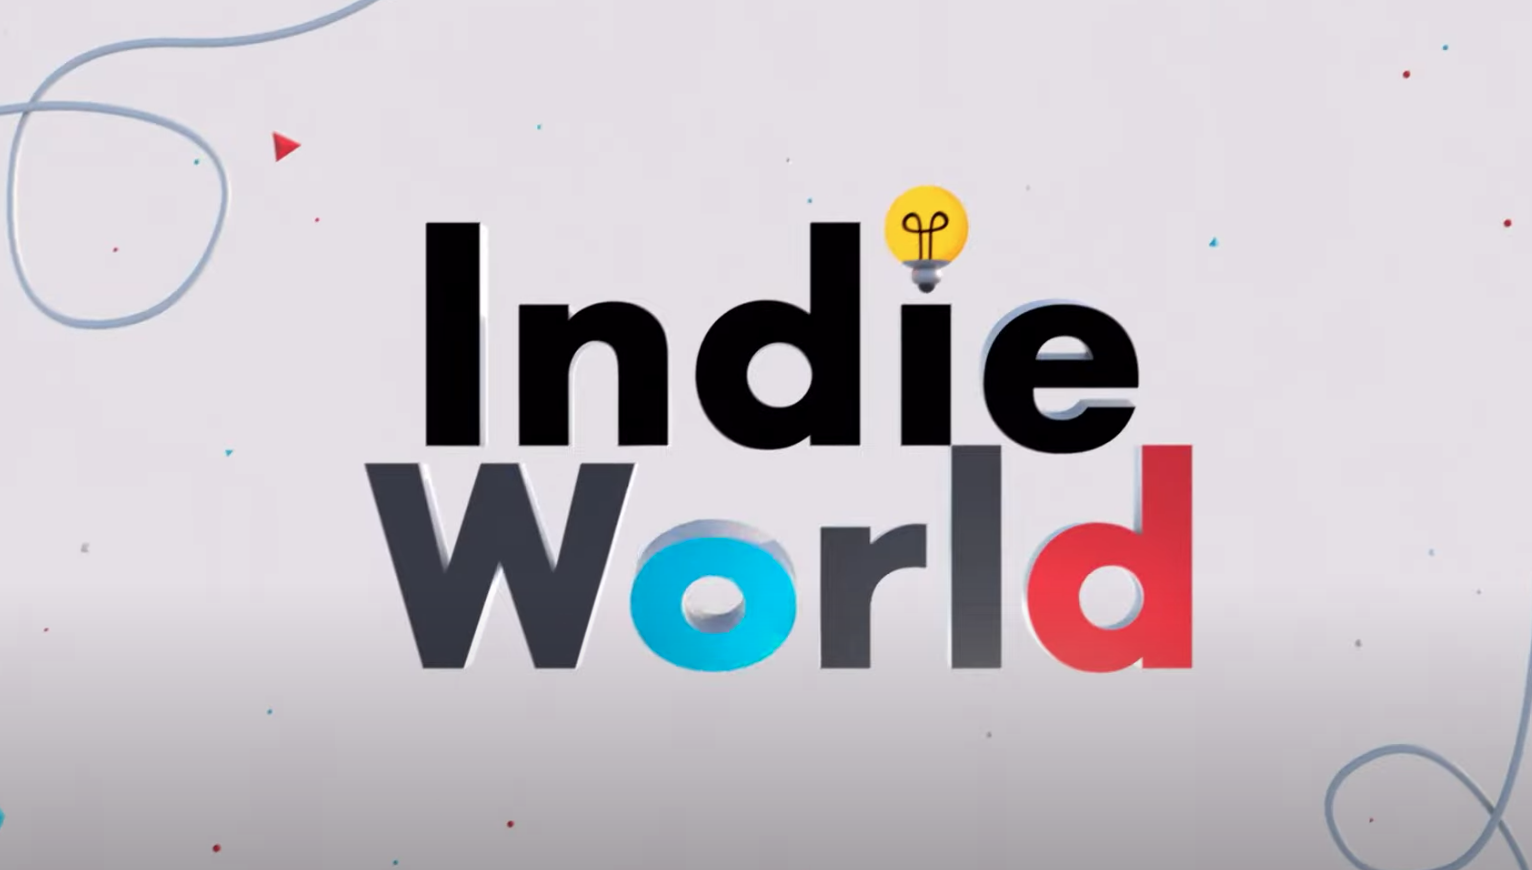 Here are the coolest trailers from Nintendo’s Indie World event